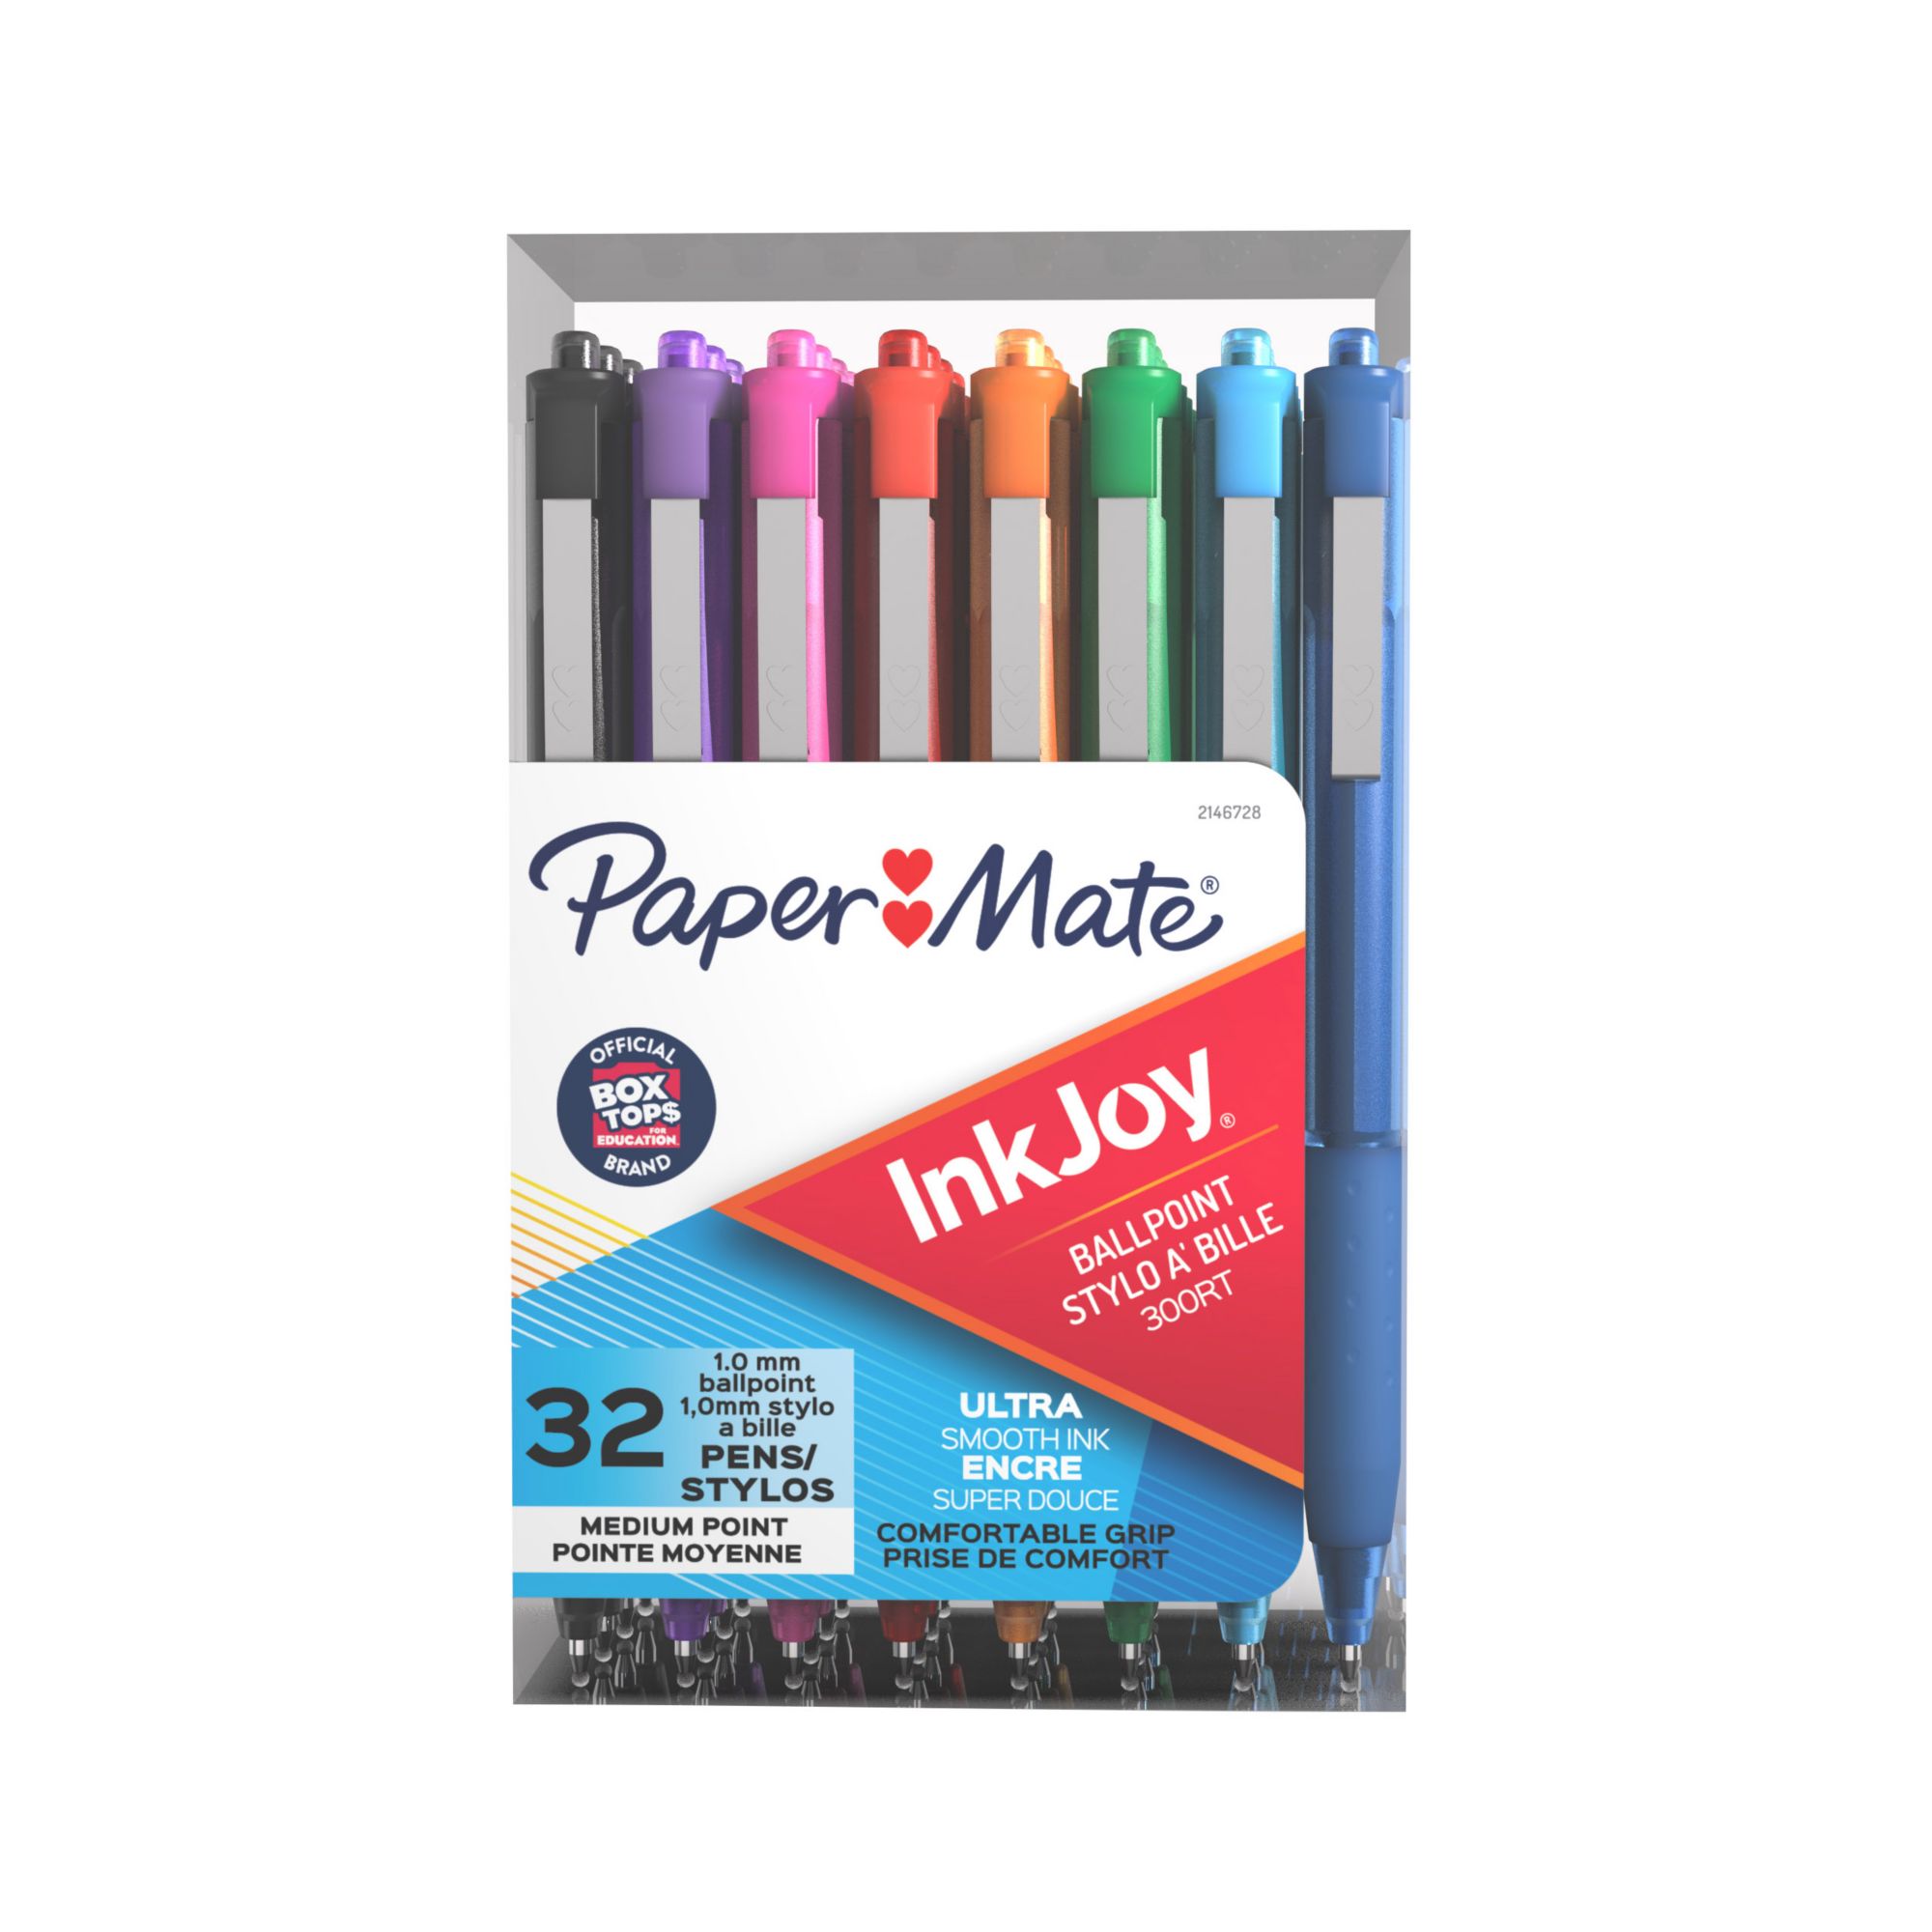 Best Paper Mate Pens For Journaling, Assorted Colors 16 Count